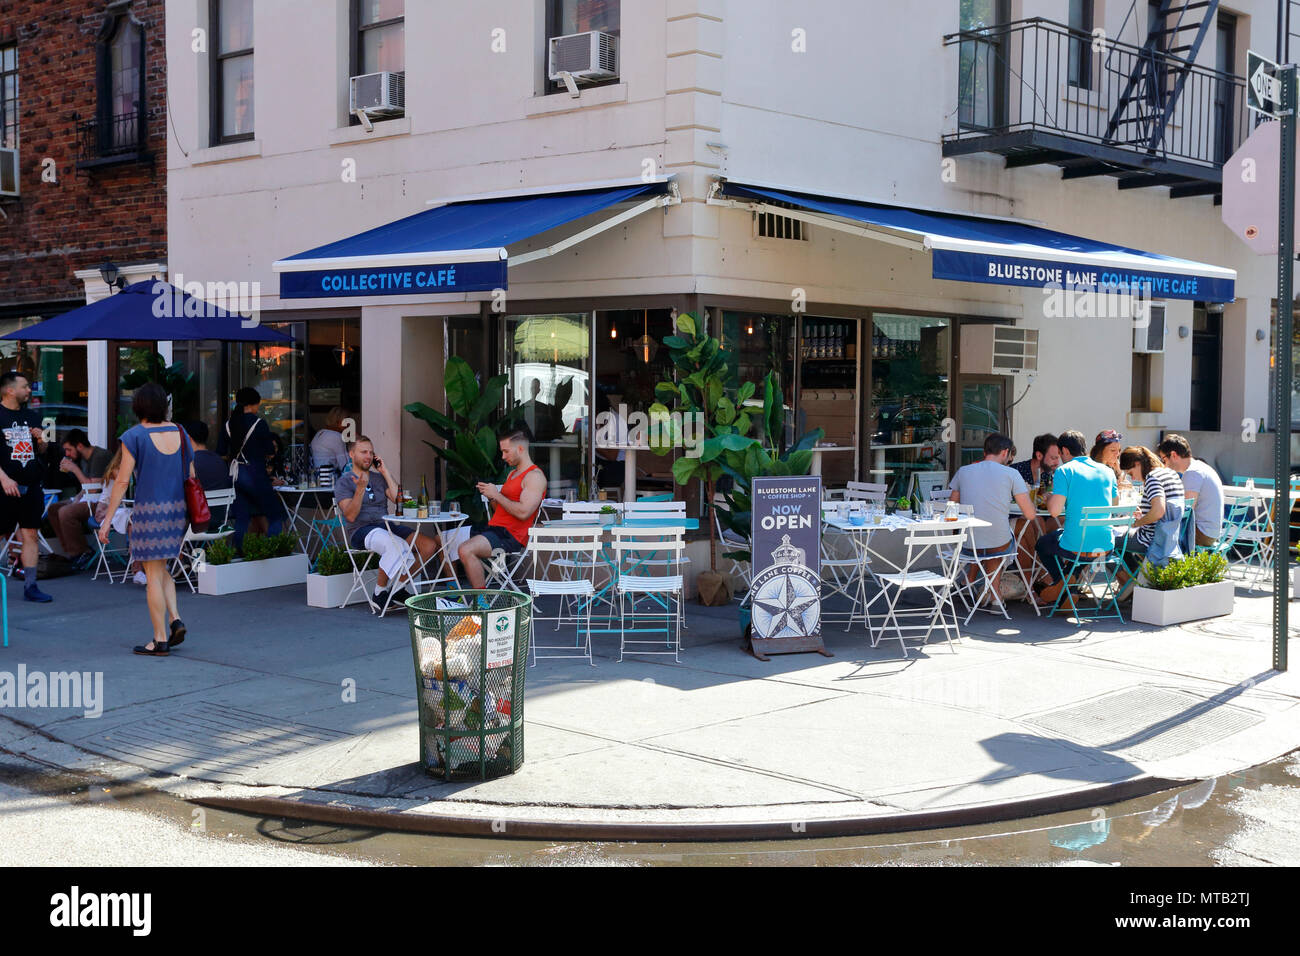 Bluestone Lane, 55 Greenwich Ave, New York, NY. exterior storefront of a trendy sidewalk cafe in the Greenwich Village neighborhood of Manhattan. Stock Photo